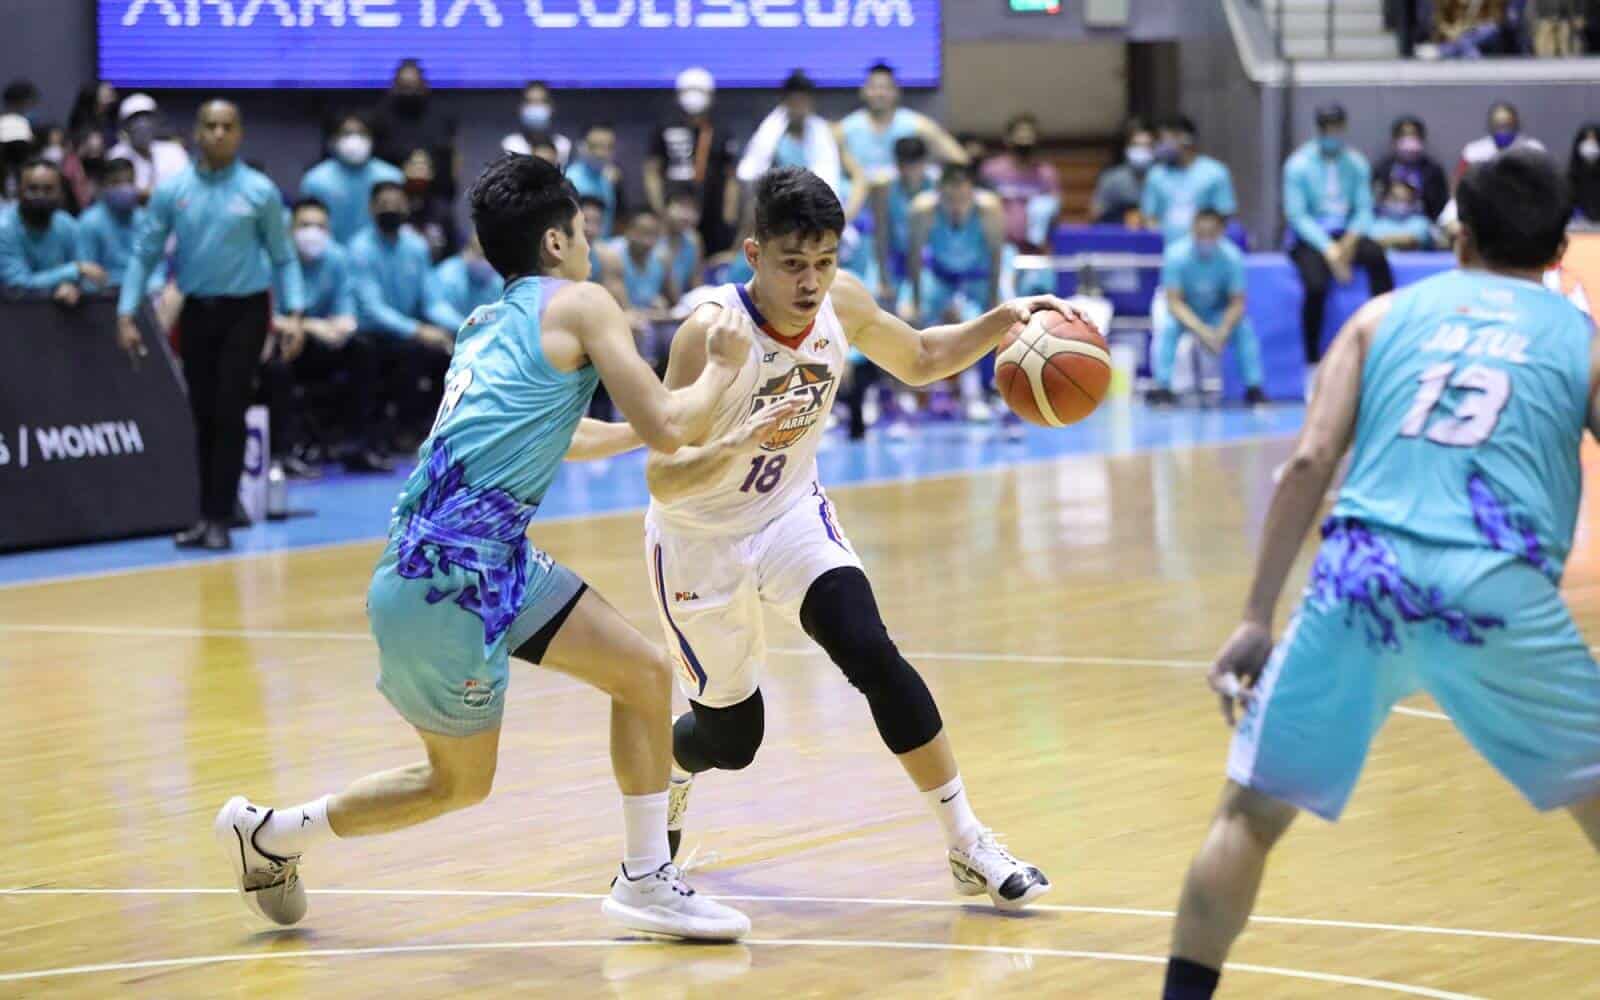 Two Asian basketball players showcase their skills on the court in a thrilling victory by NLEX.